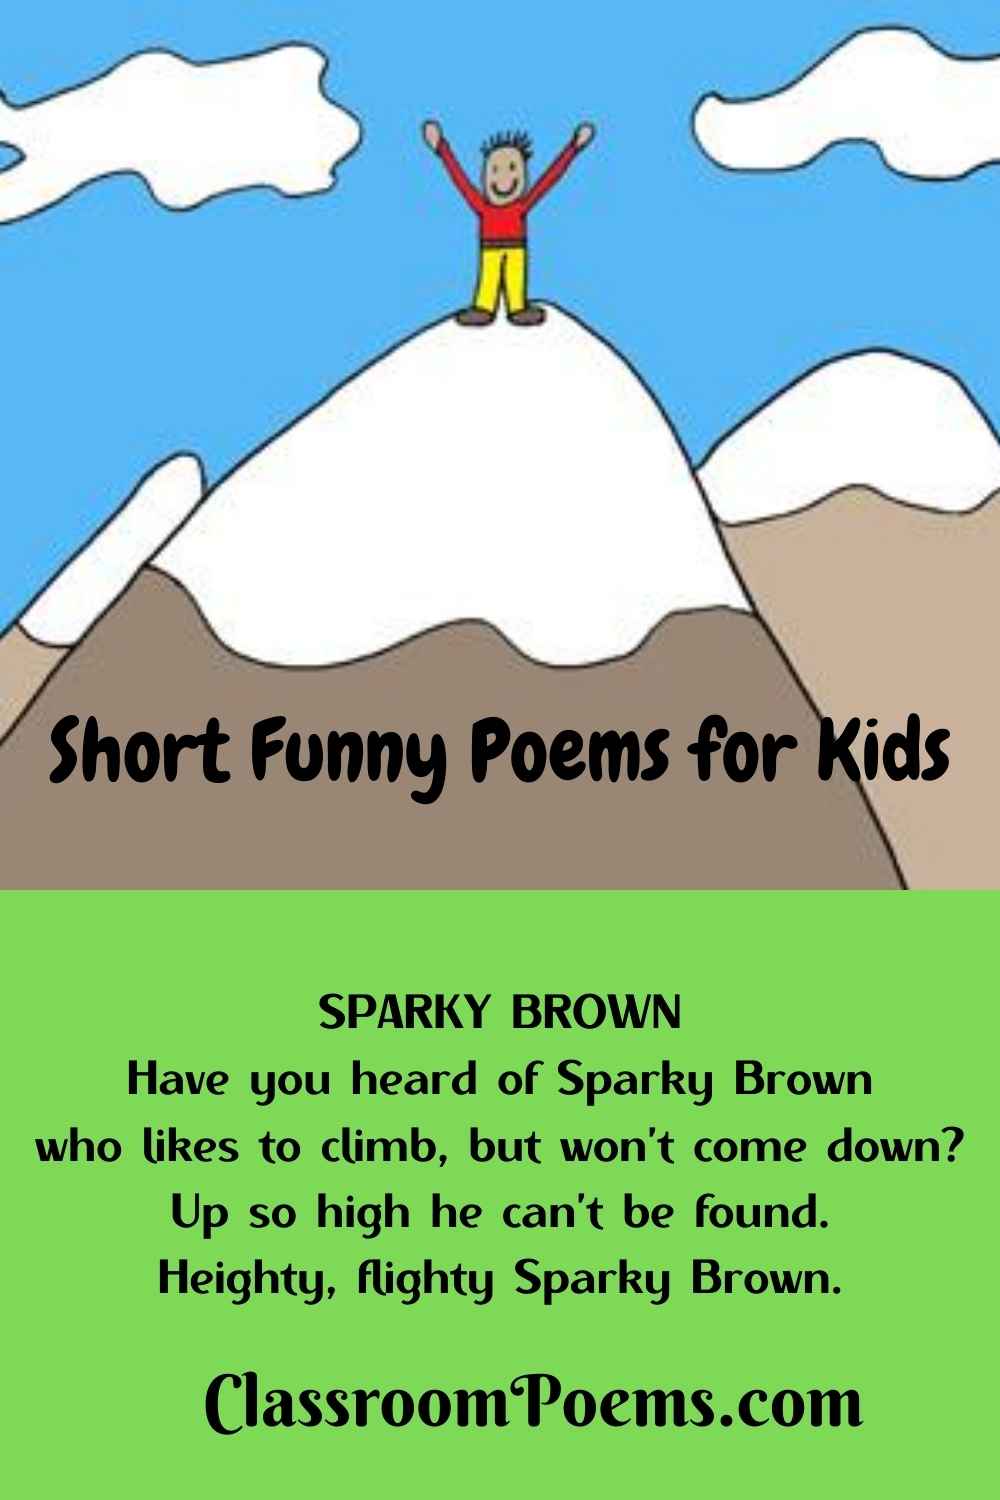 Boy on mountain cartoon. SPARKY BROWN, a funny short poem by Denise Rodgers on ClassroomPoems.com.